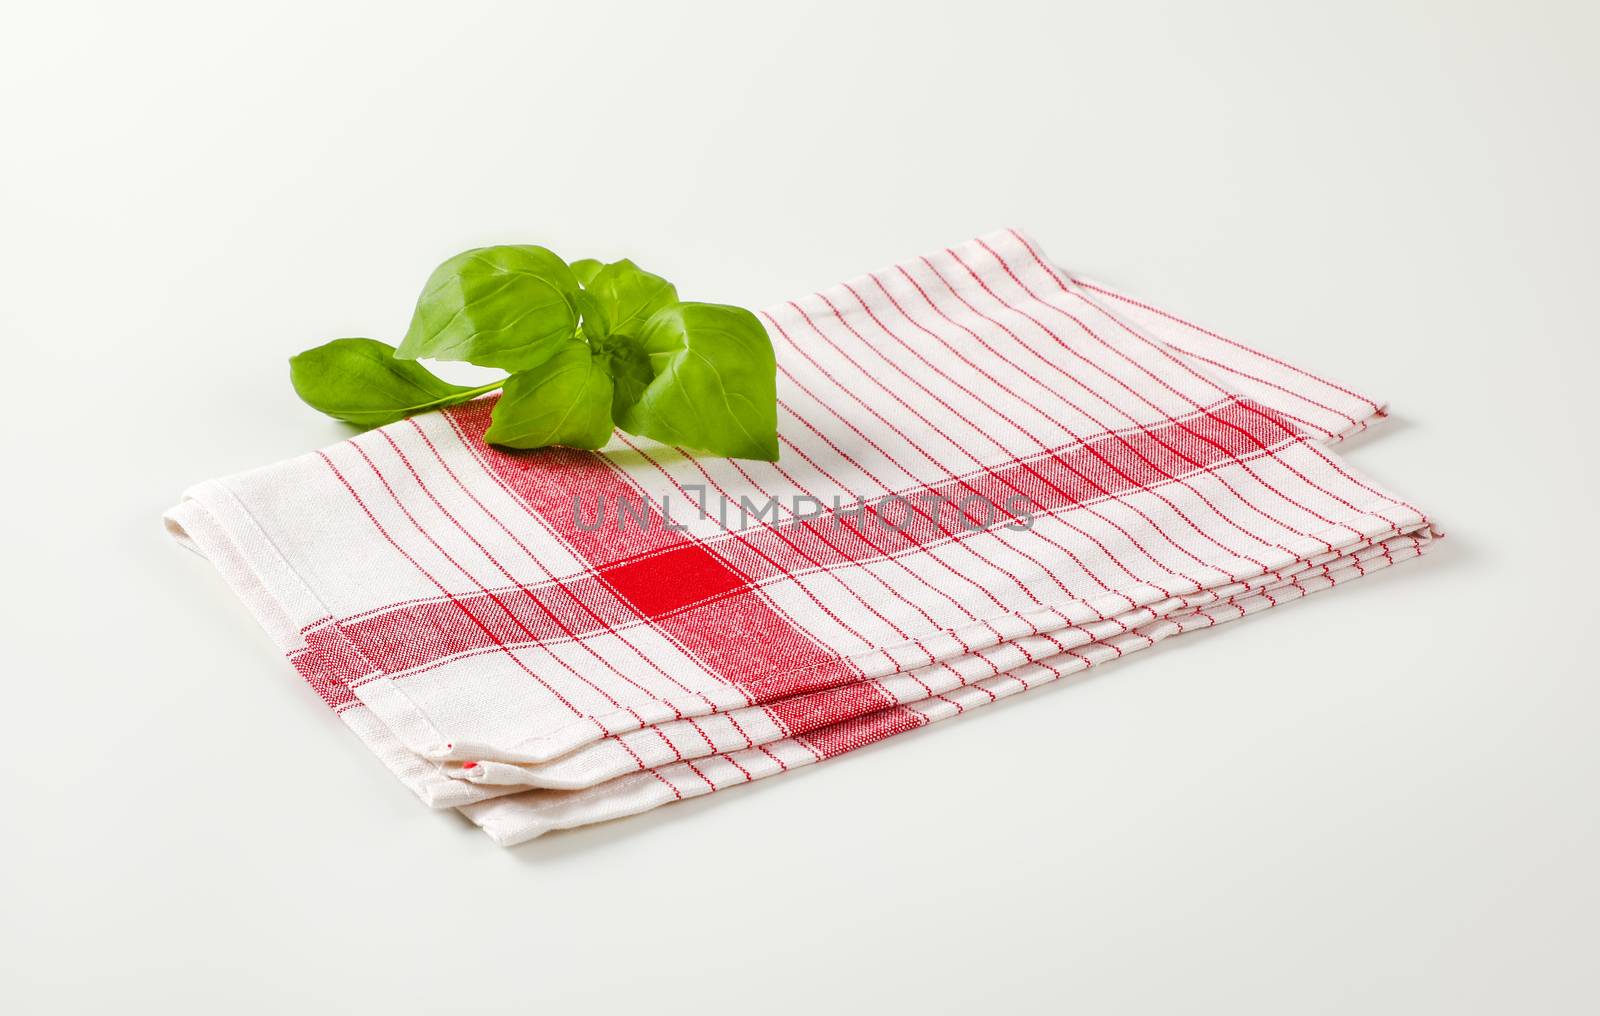 Tea towel and basil leaves by Digifoodstock